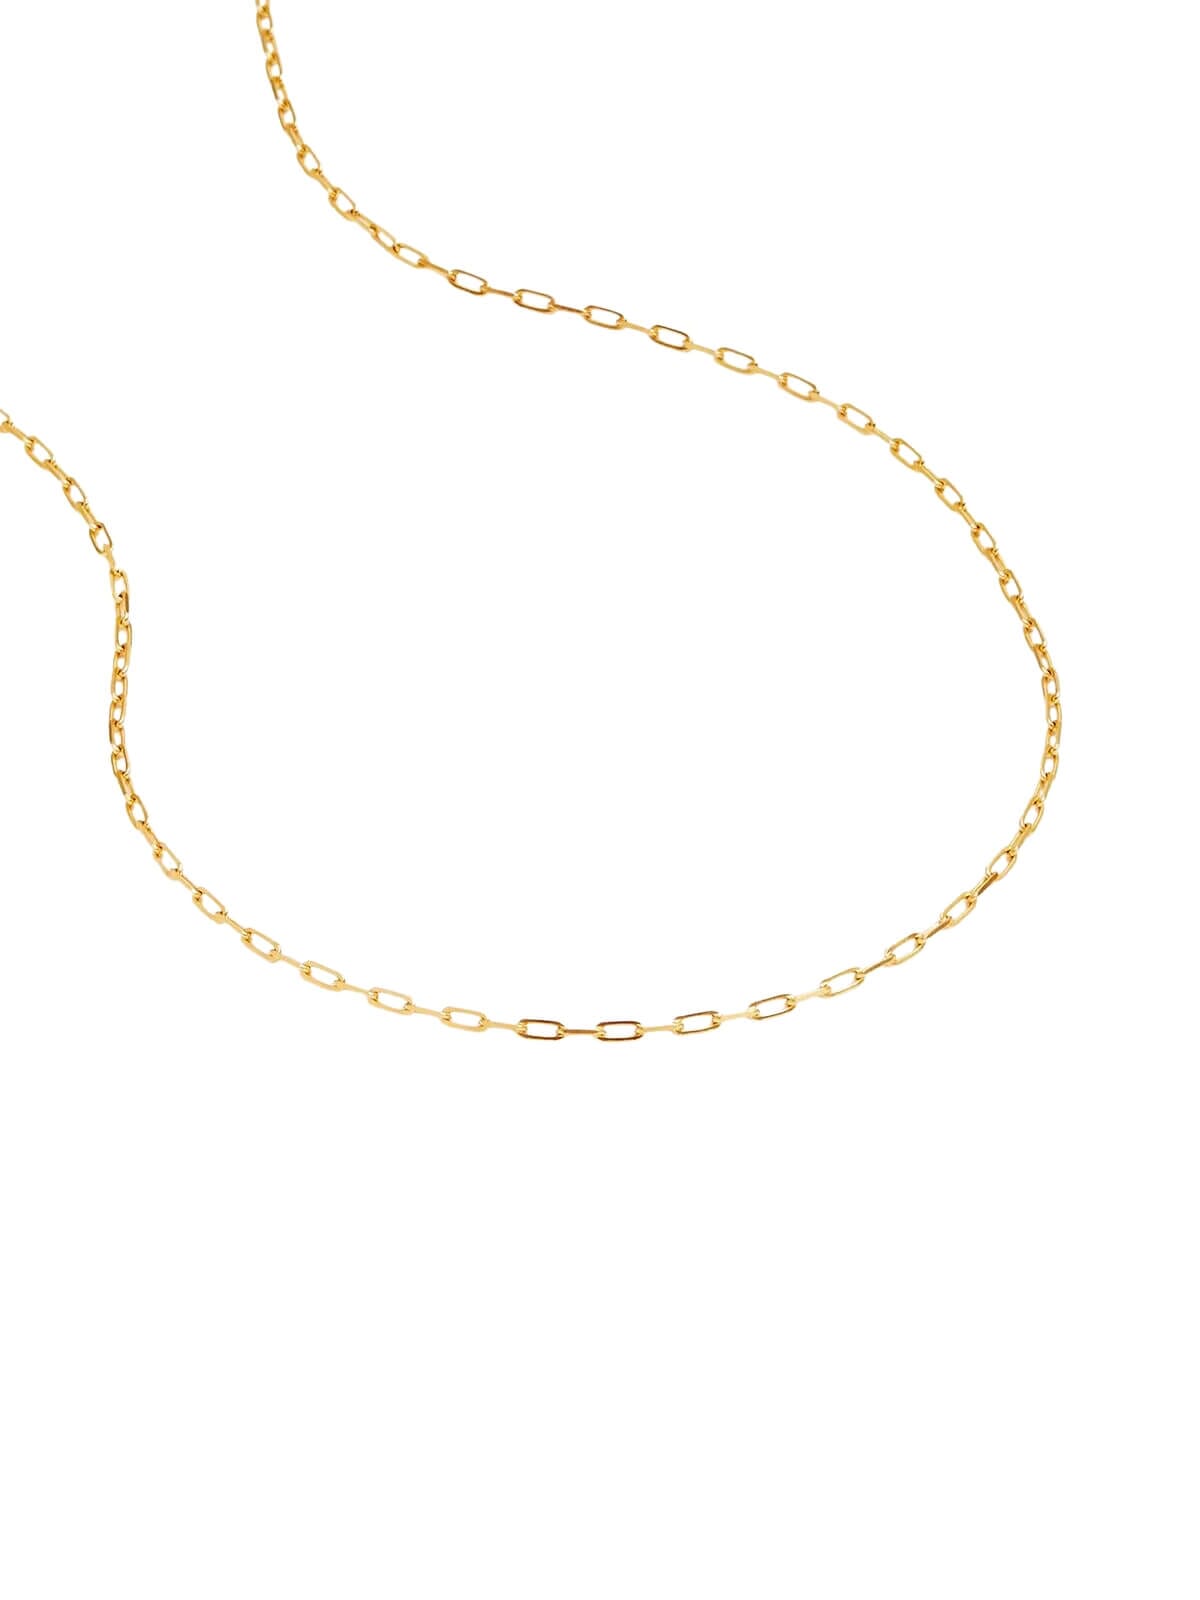 By Charlotte | 18" Link Chain Necklace - Gold | Perlu